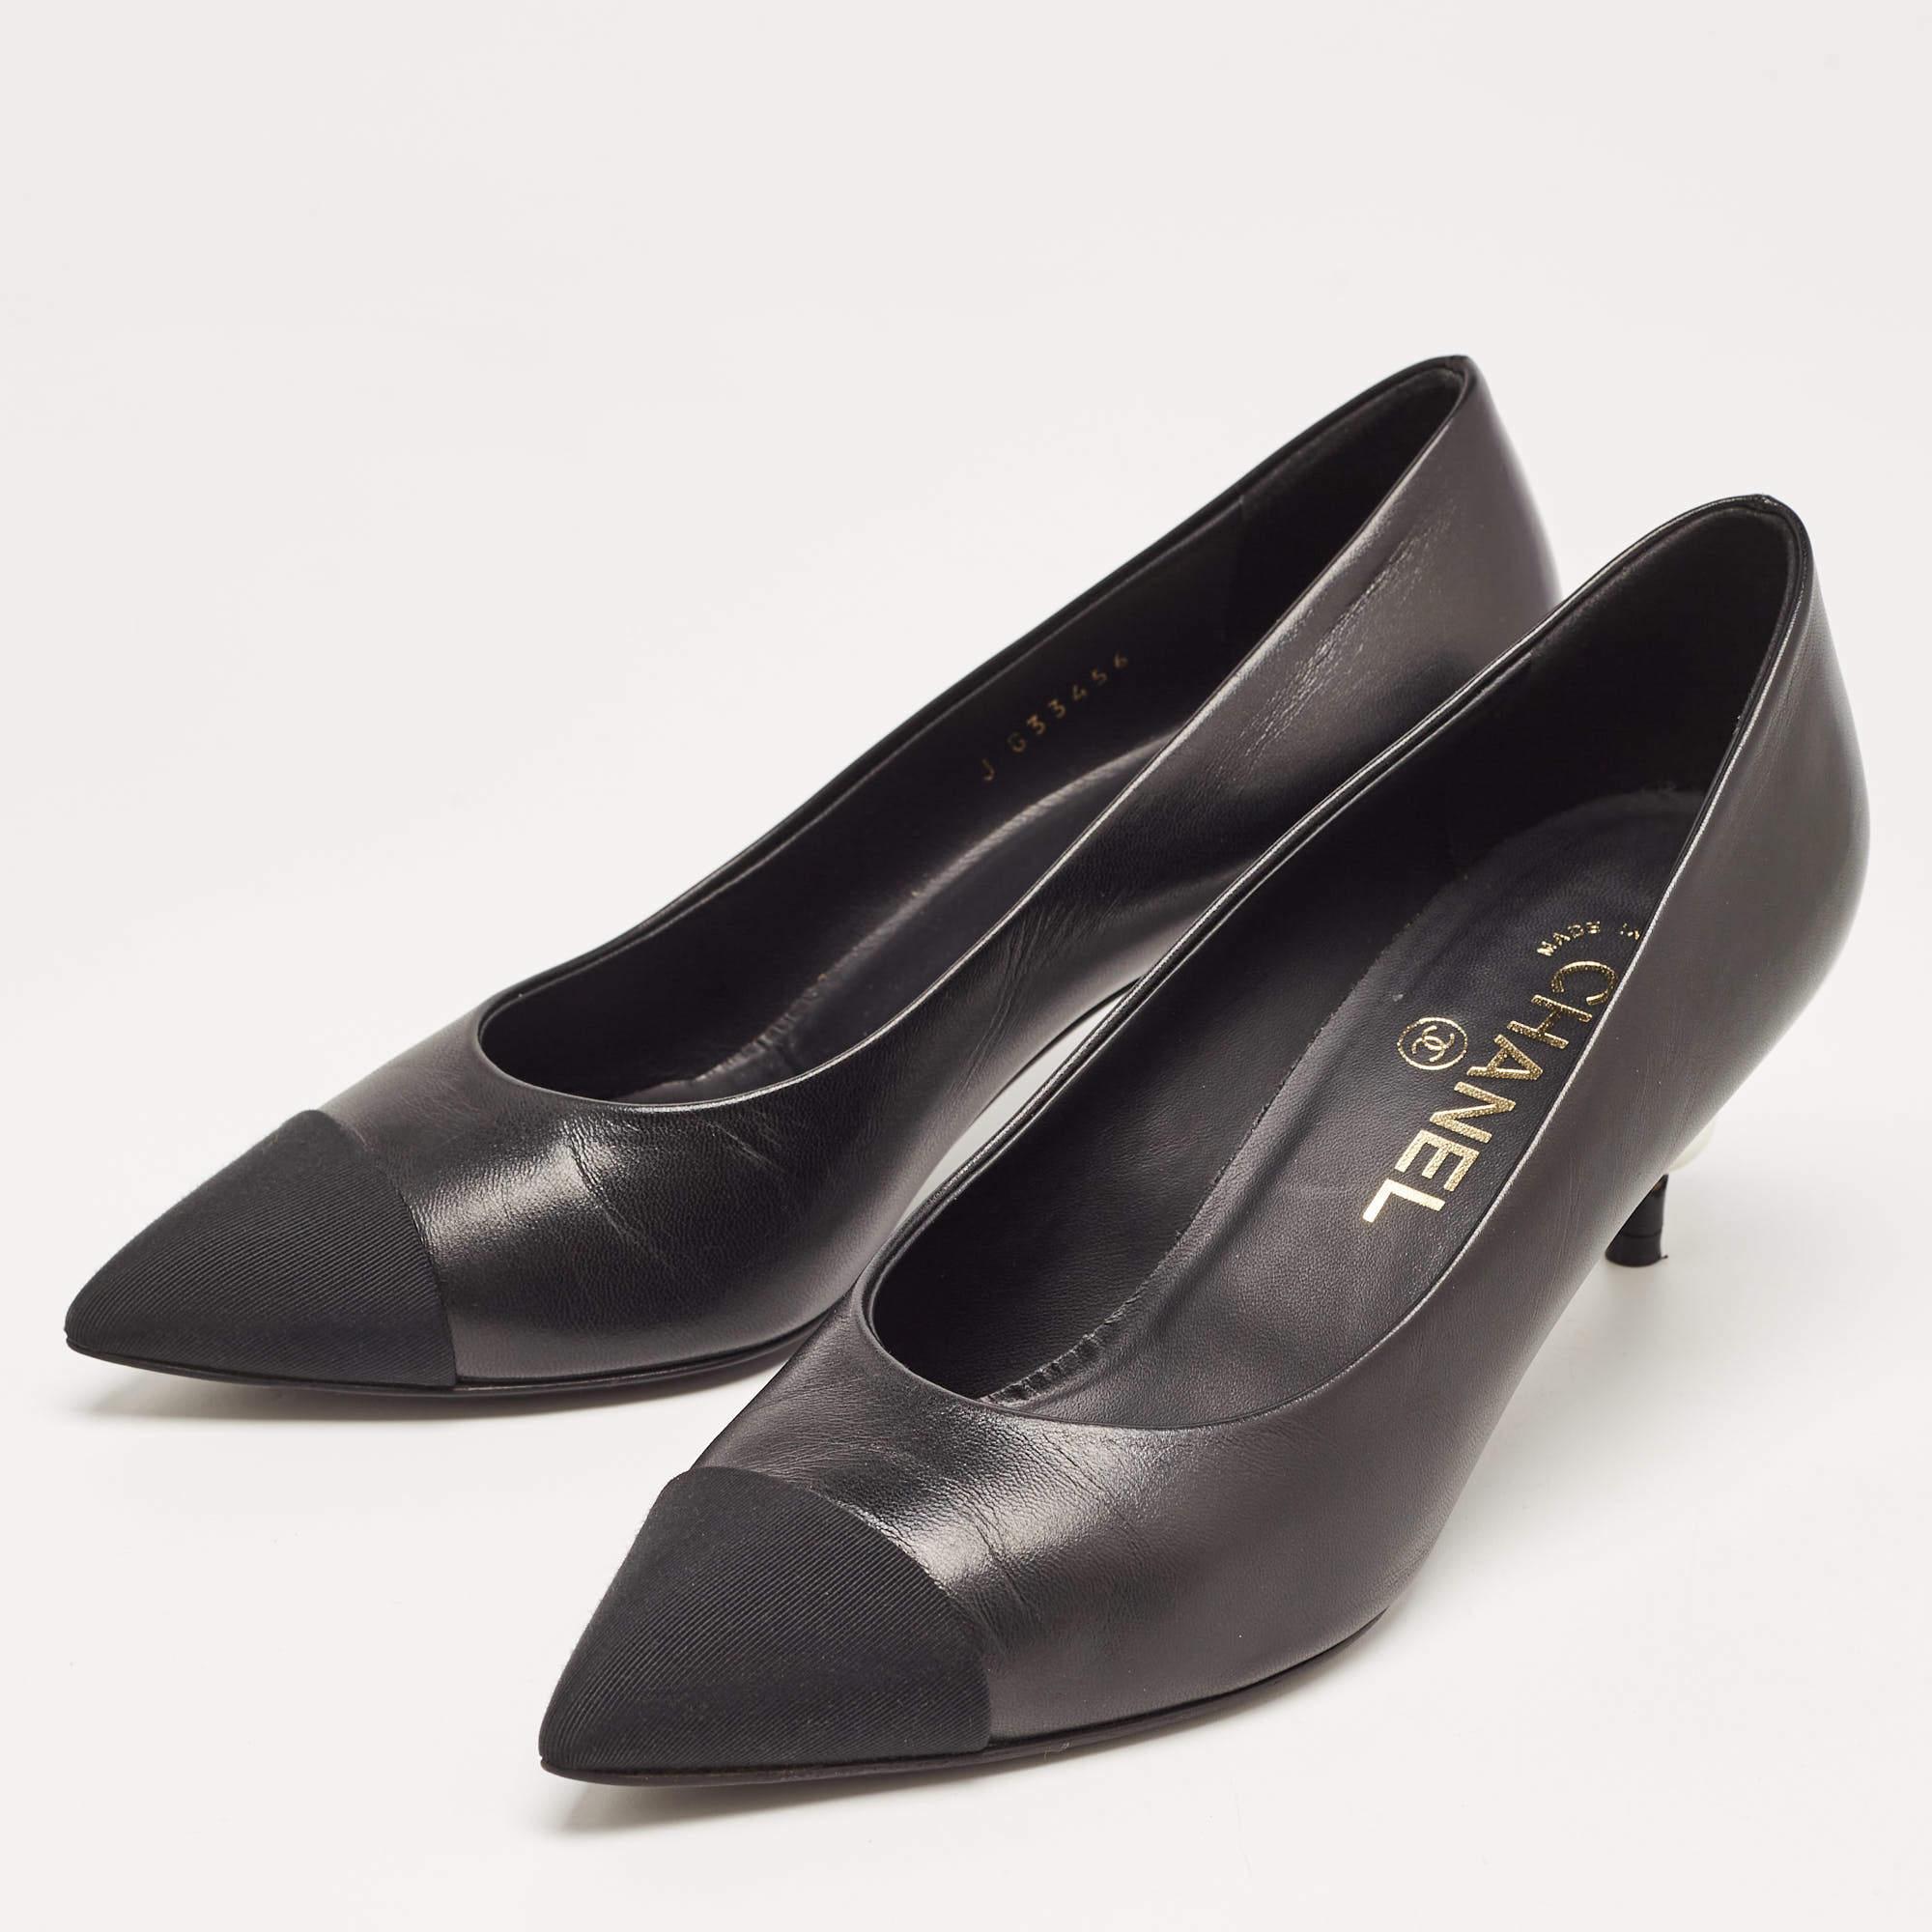 Chanel Black Leather and Canvas CC Pointed Toe Pumps Size 36 1